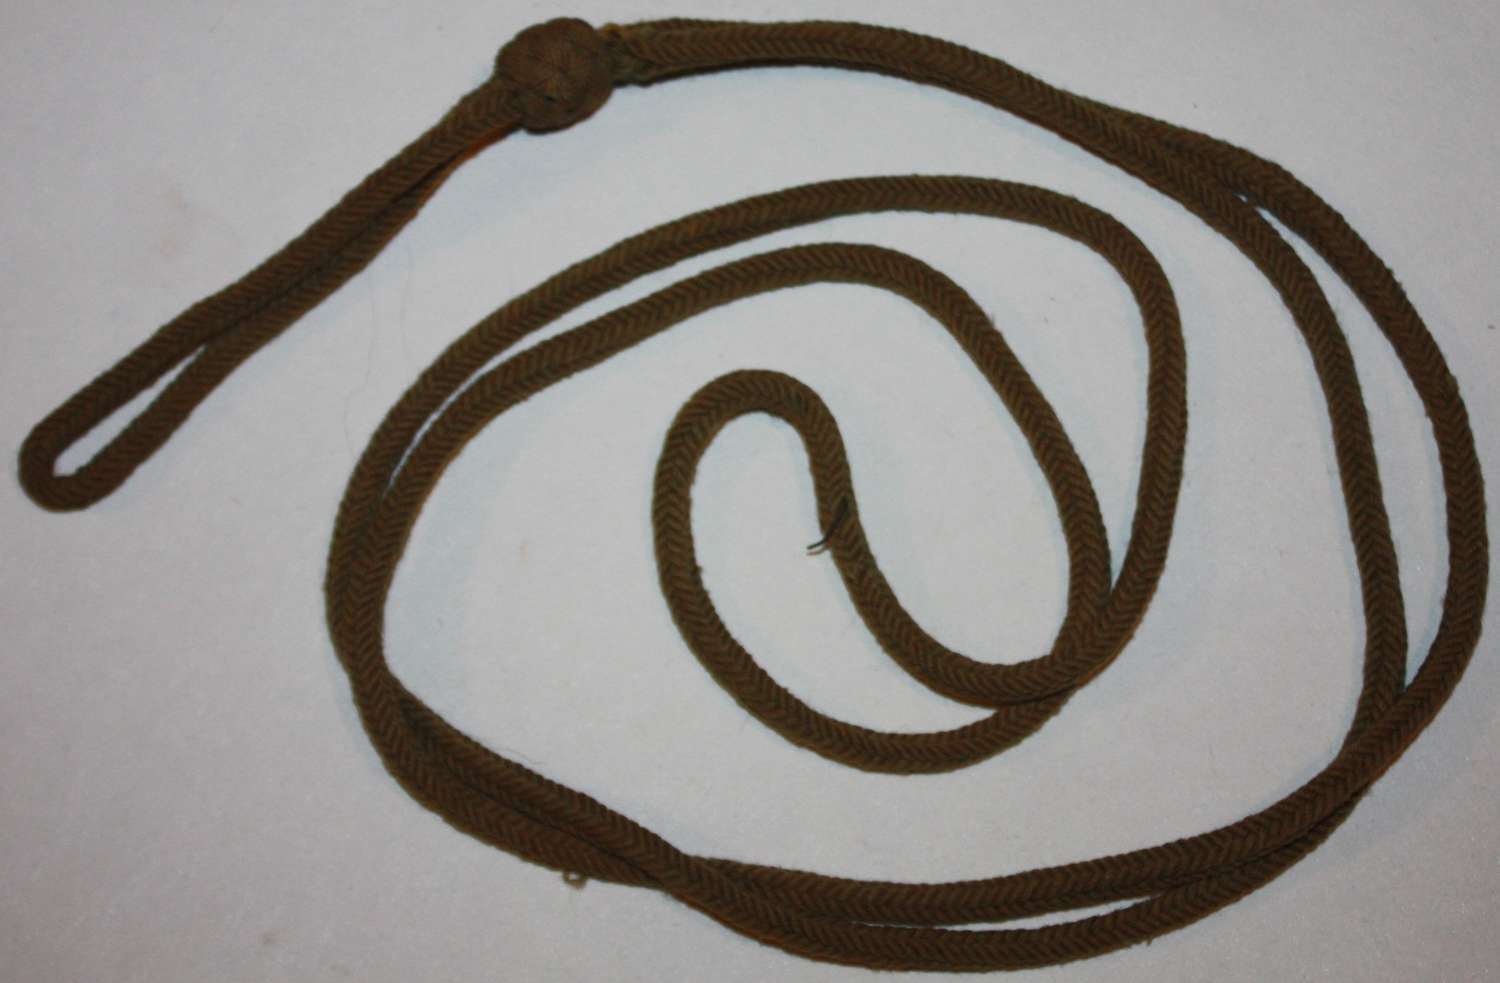 A WWI PERIOD PISTOL LANYARD GOOD USED EXAMPLE MISSING A KNOT